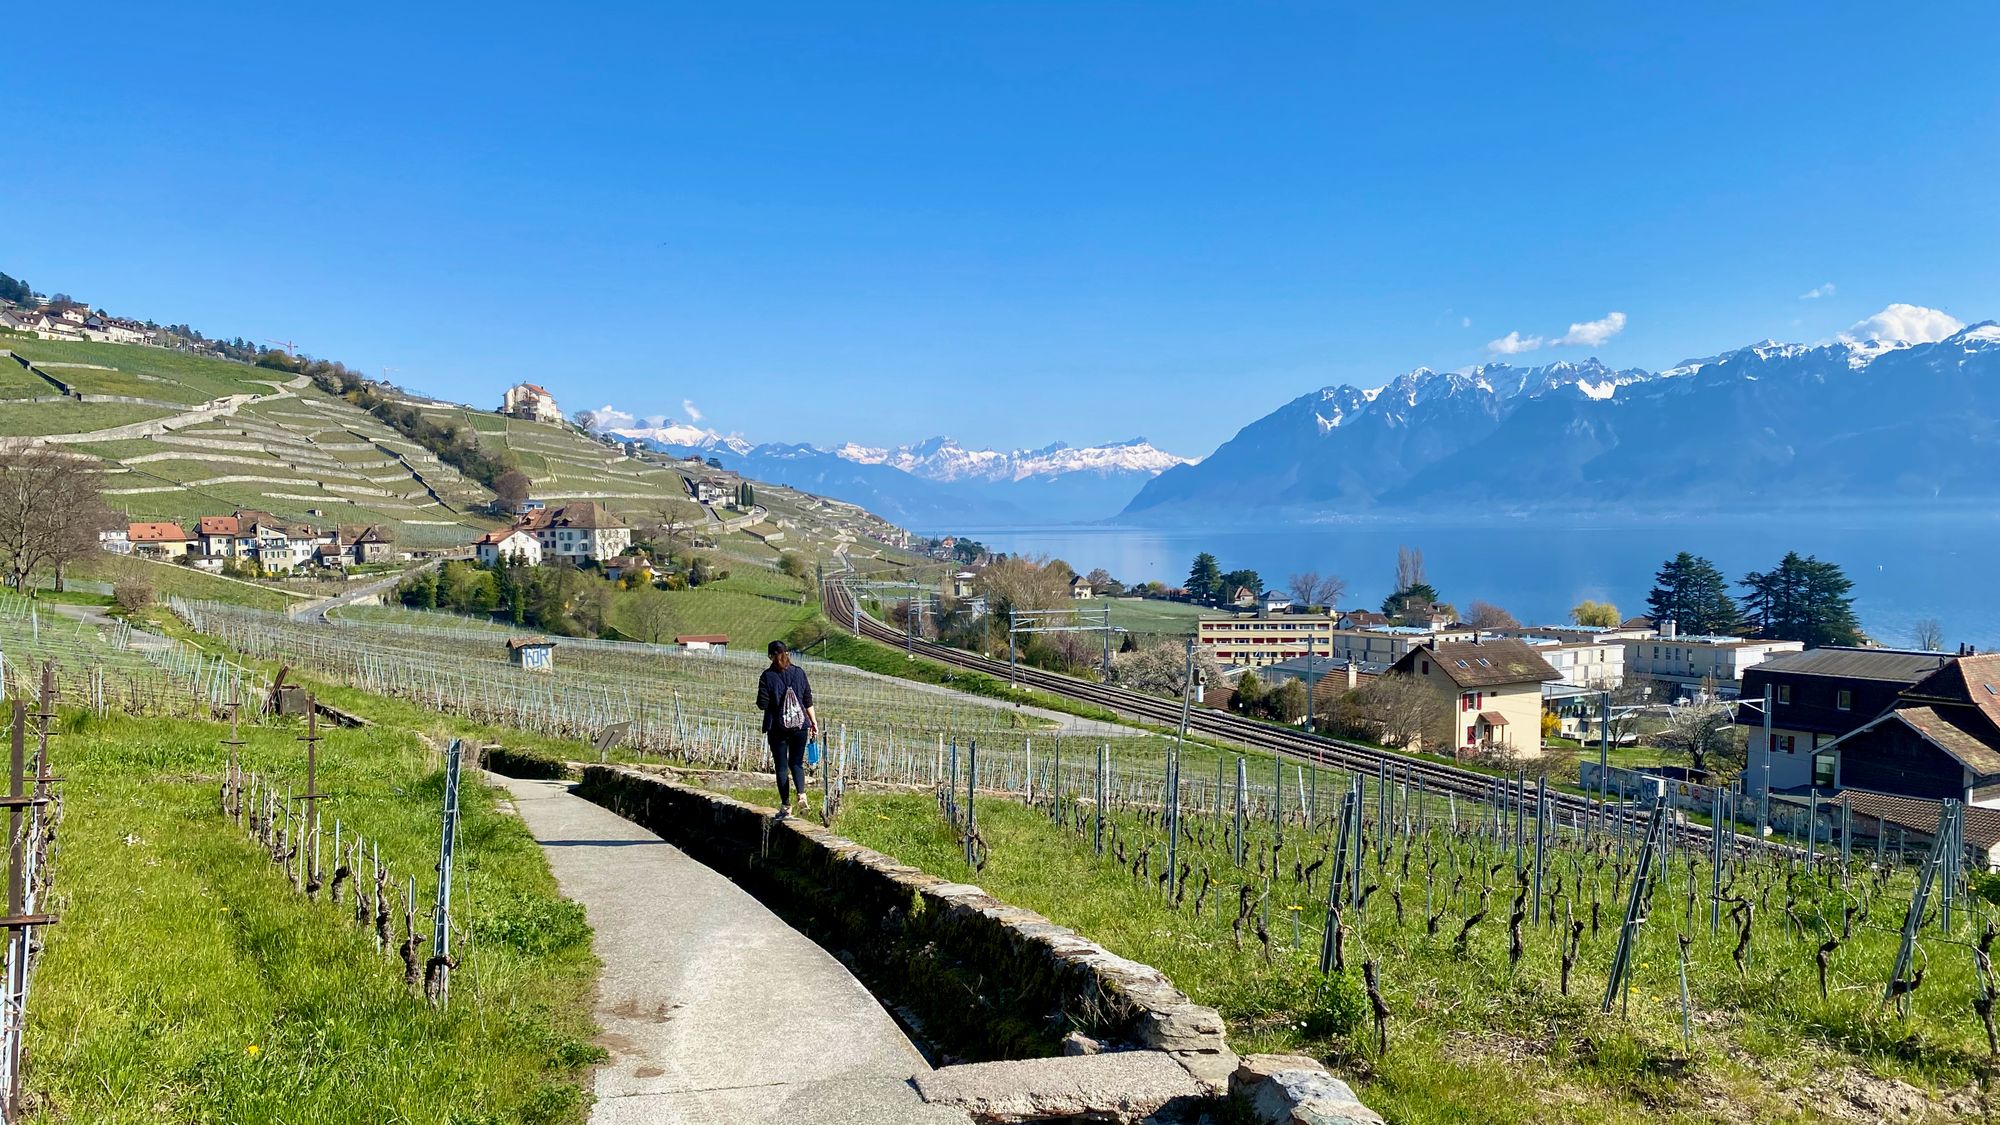 The wine fields of Lavaux, spring 2023